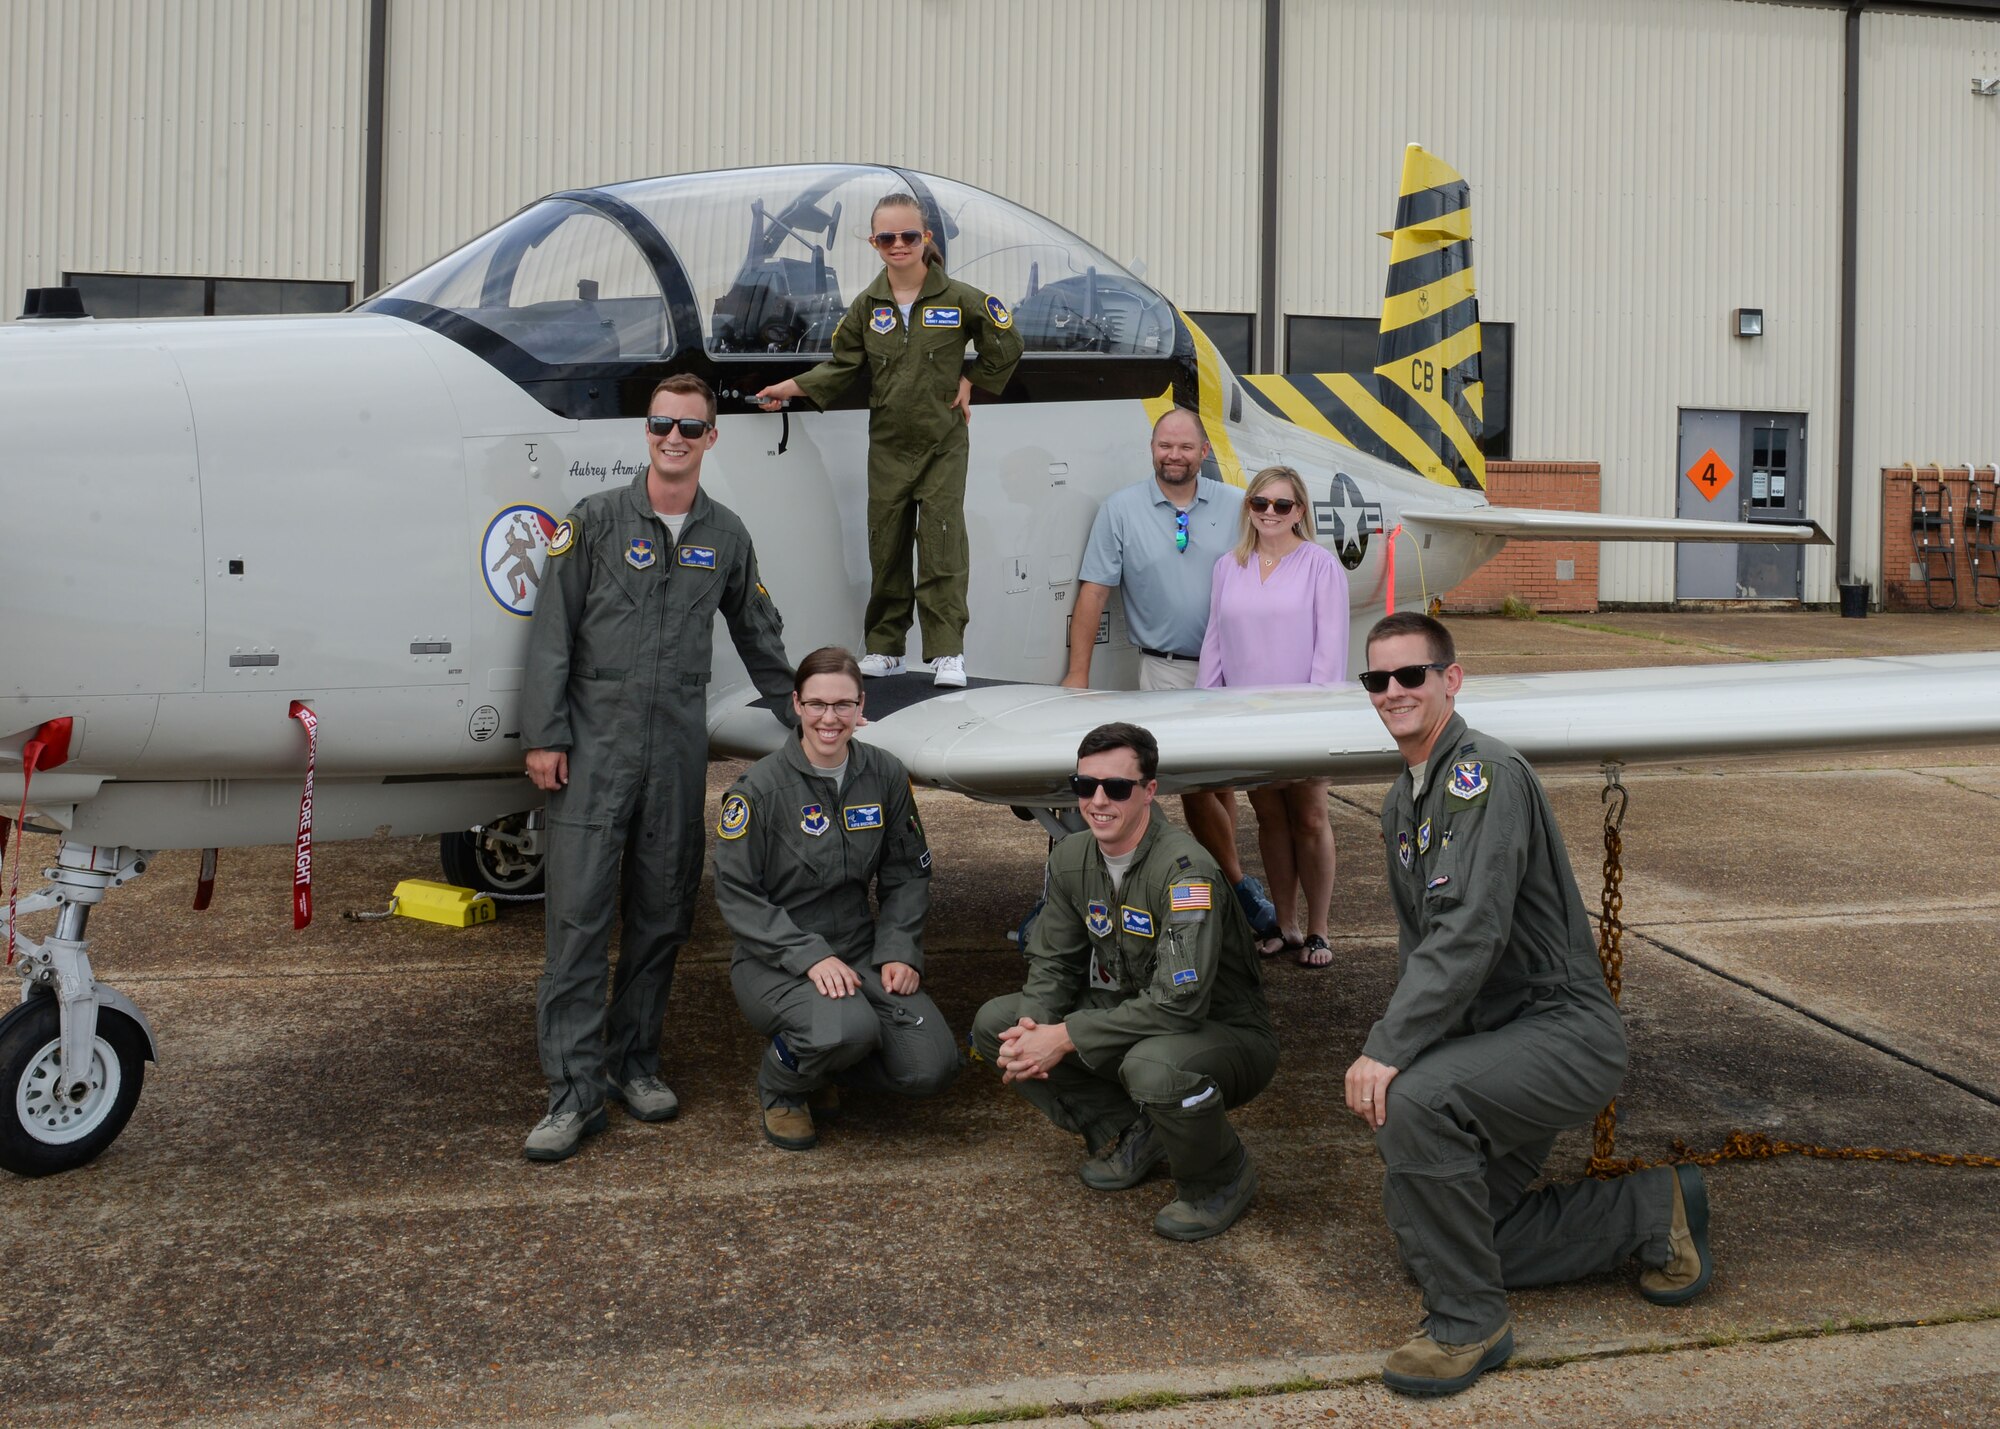 Aubrey Armstrong, her parents and pilots from the 41st Flying Training Squadron stand in front of a T-6 Texan II June 25, 2019, on Columbus Air Force Base, Miss. Aubrey spent the day with the pilots and, she got her own flight suit. (U.S. Air Force photo by Airman Davis Donaldson)